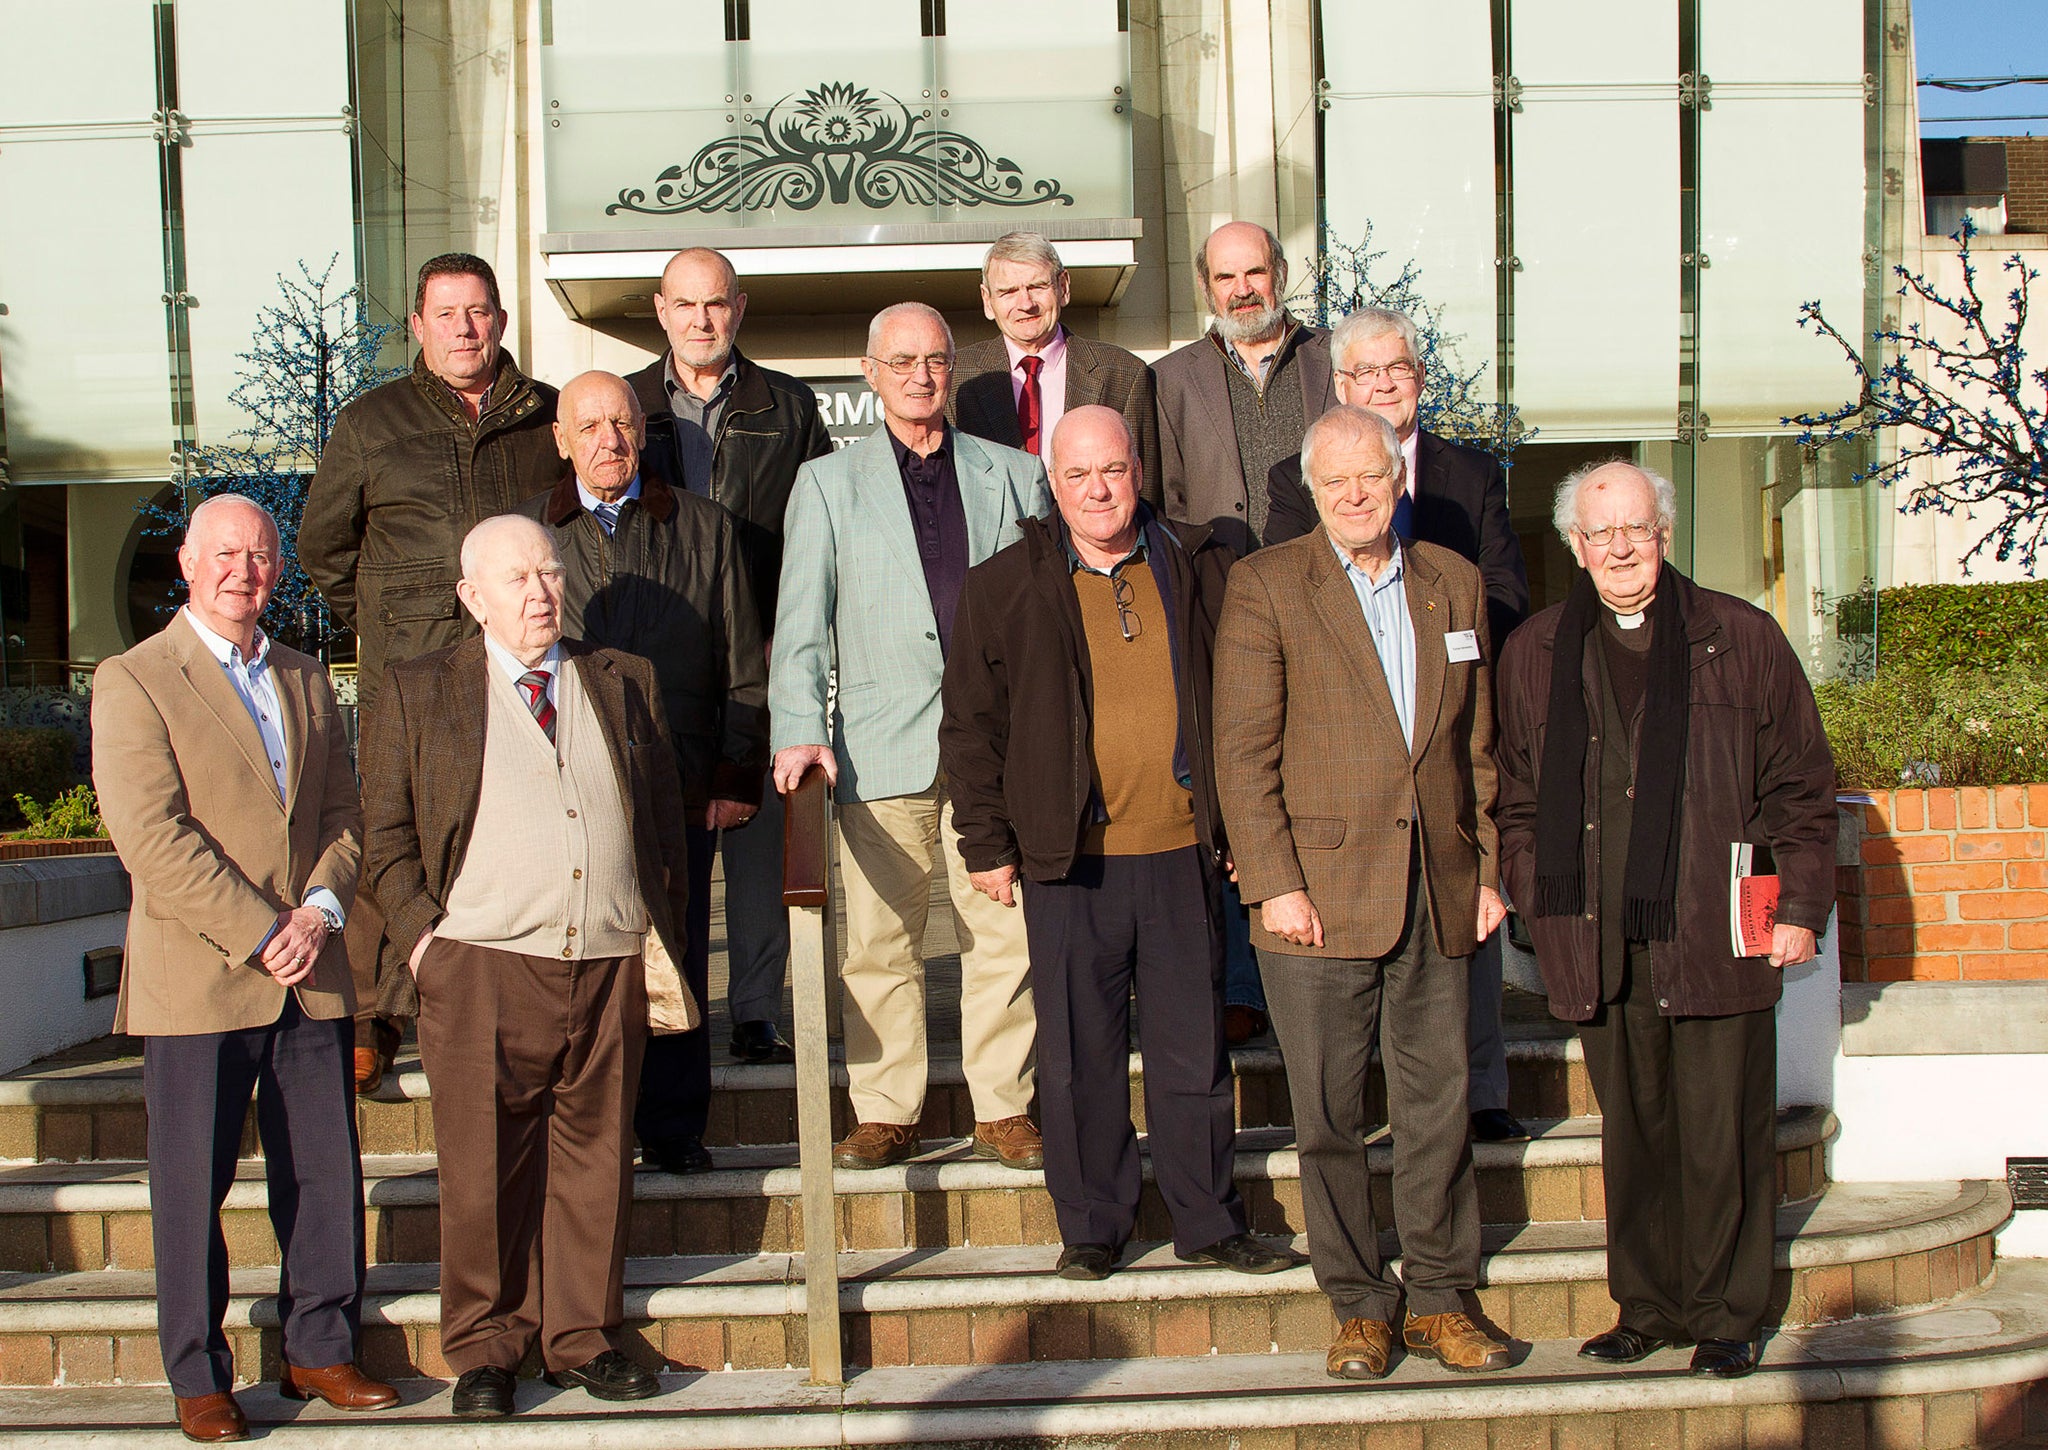 Twelve of the original "hooded men" who are being represented by Amal Clooney